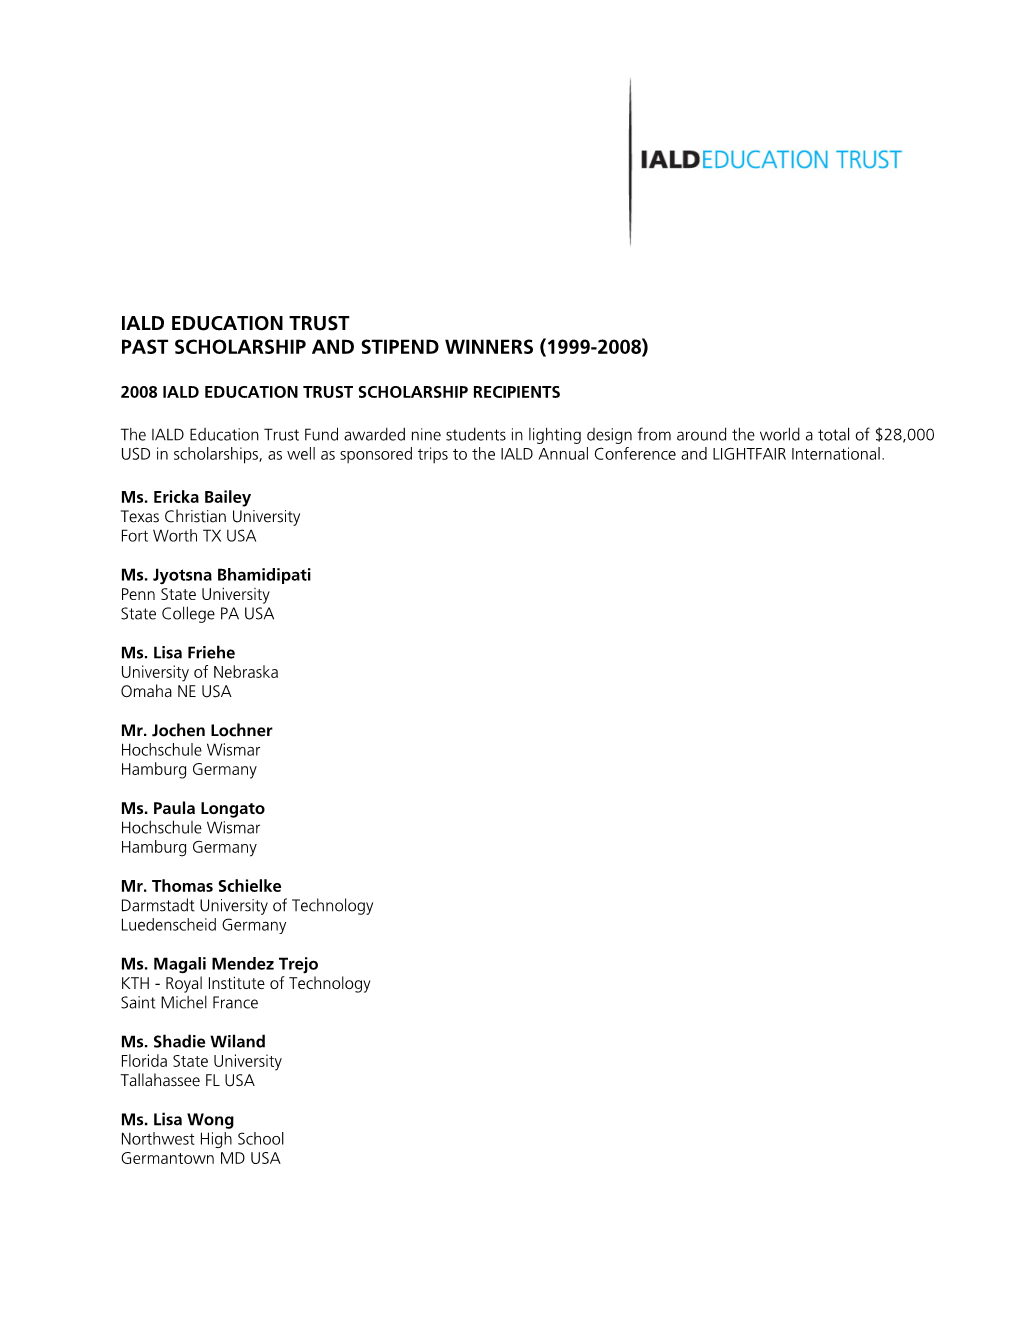 Iald Education Trust Past Scholarship and Stipend Winners (1999-2008)